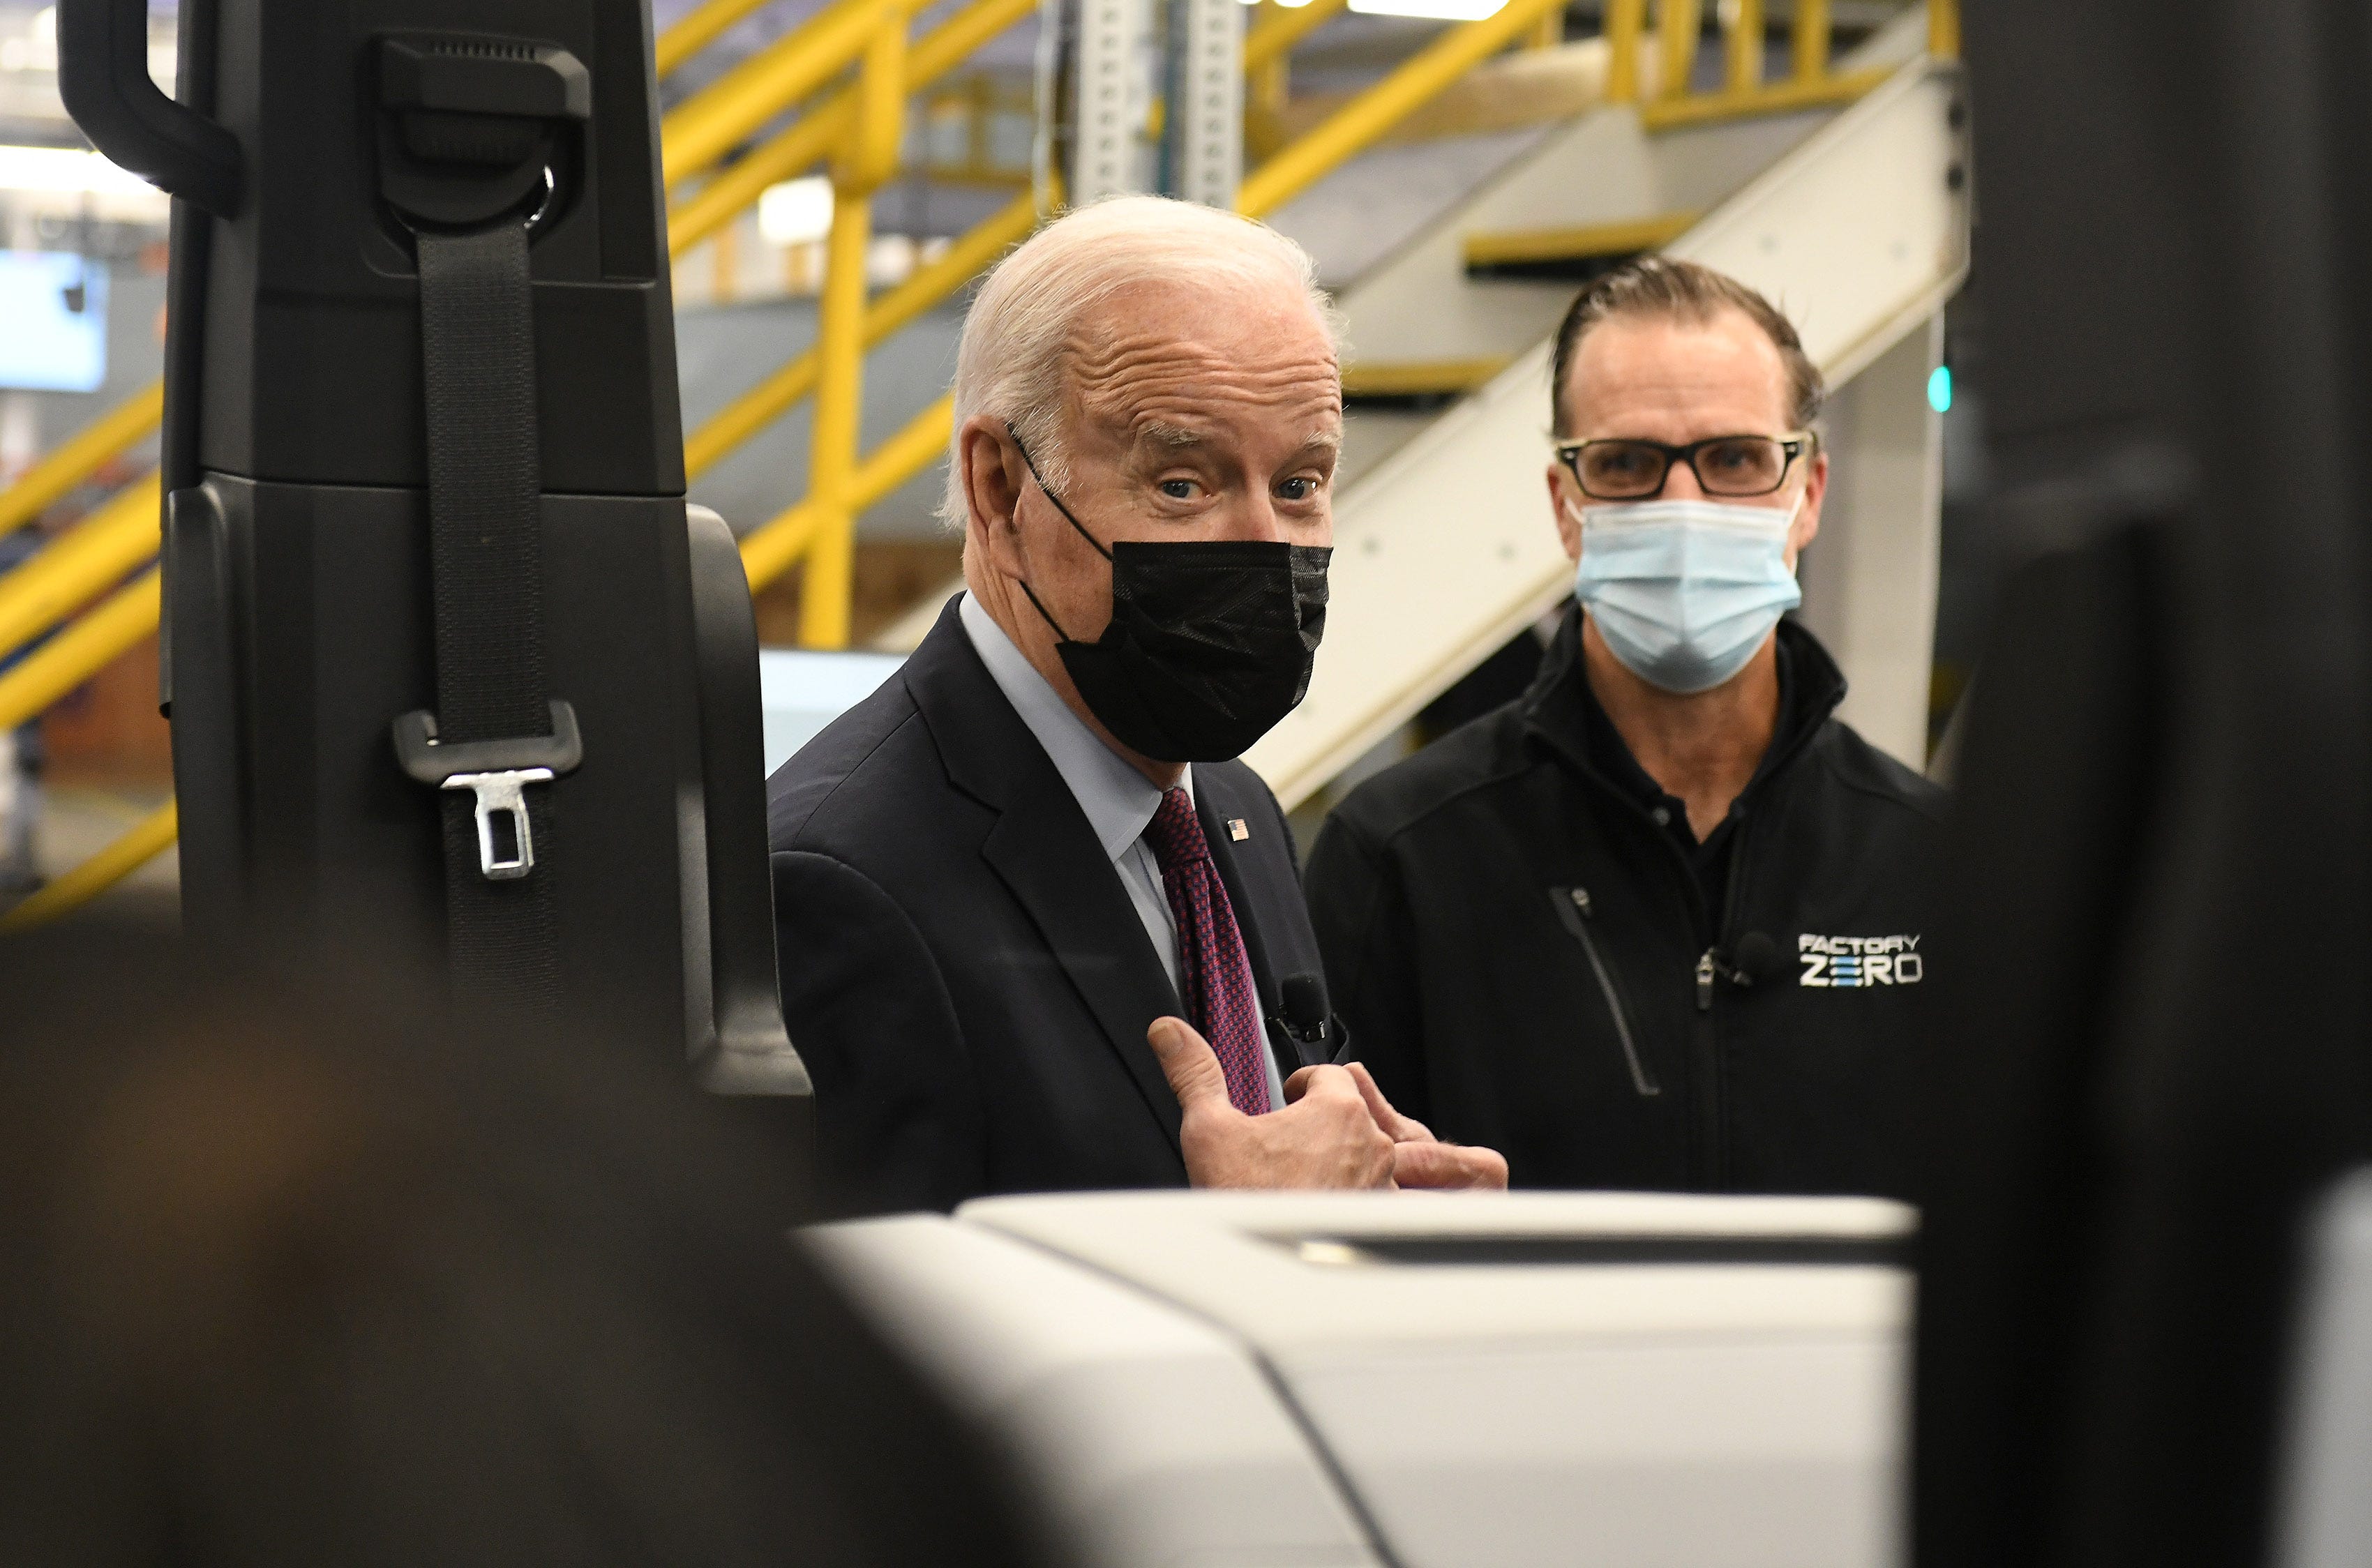 President Joe Biden talks about what he is seeing with plant director Jim Quick, right, at the General Motors Factory ZERO.